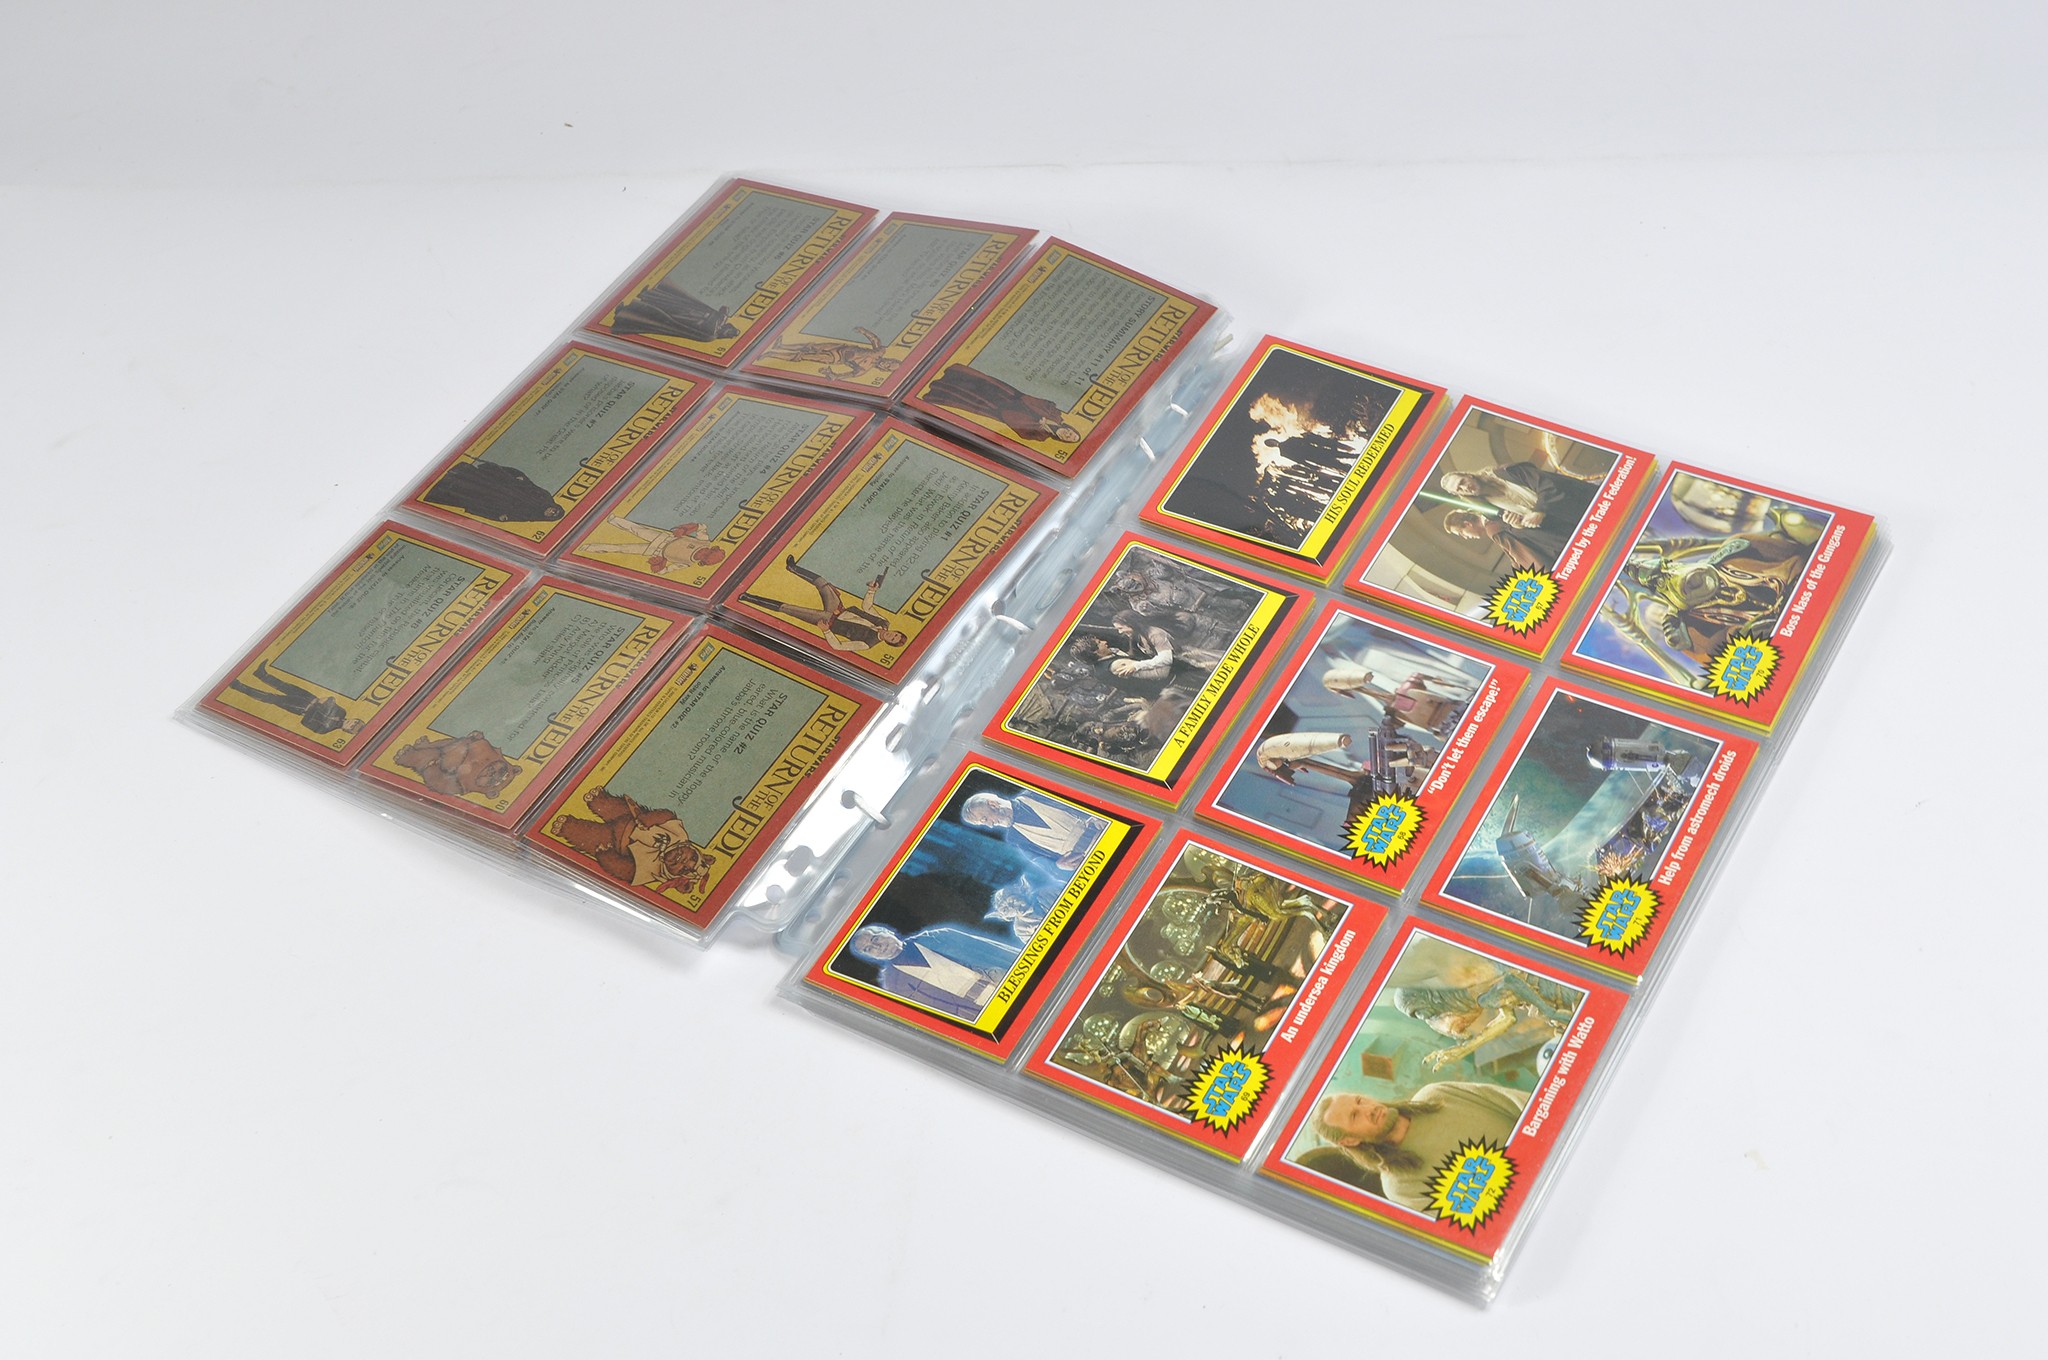 Star Wars Original Topps Trading Cards comprising a quantity of 117 issues from various series.